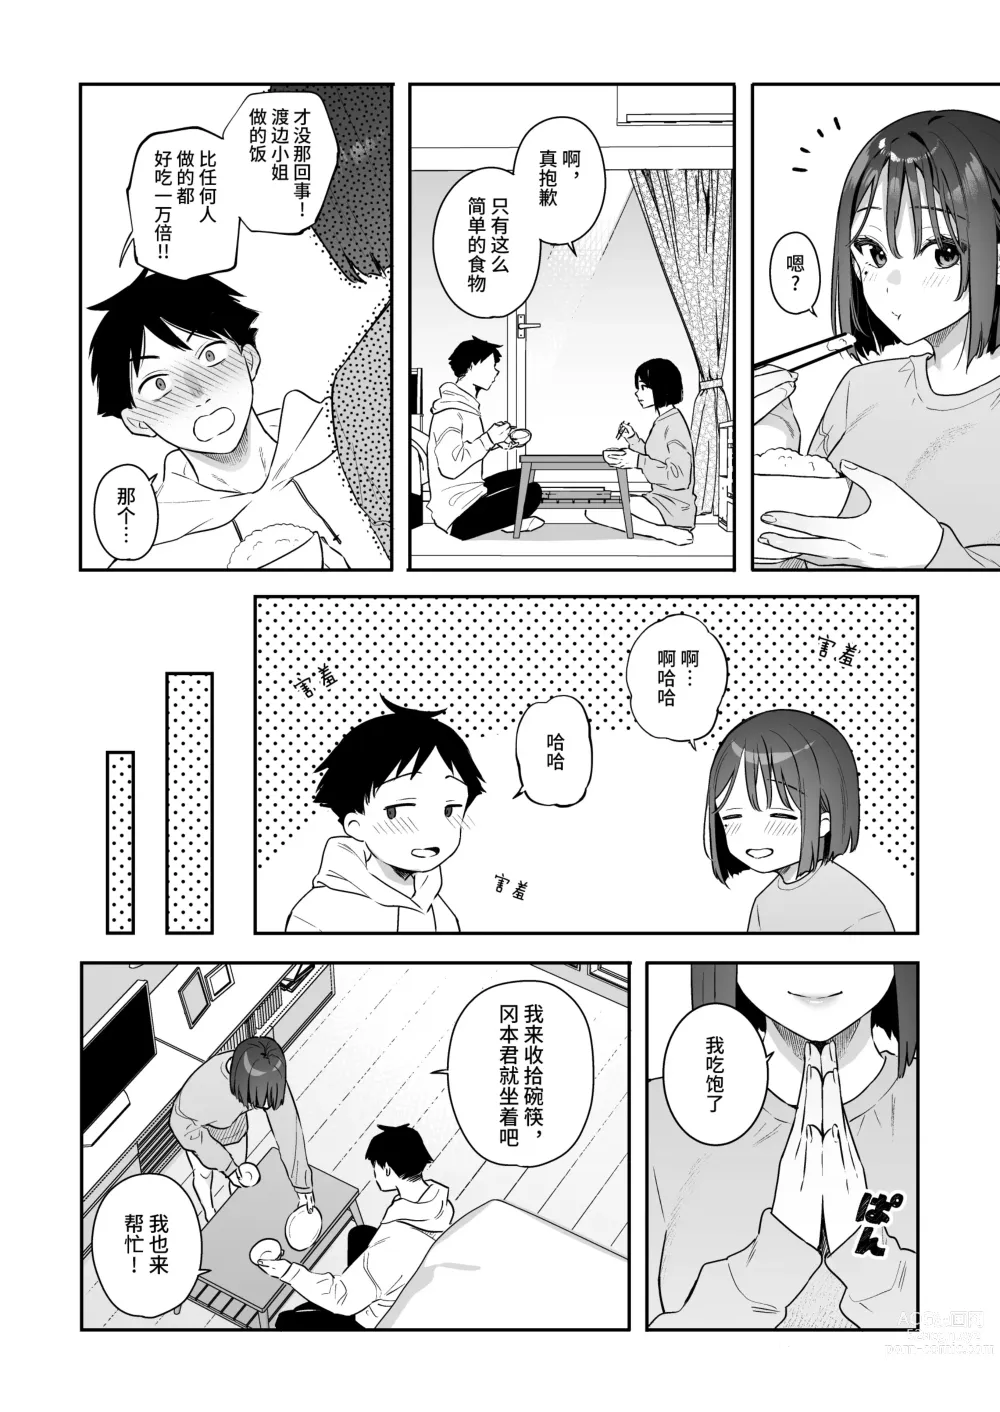 Page 37 of doujinshi 她的发情开关